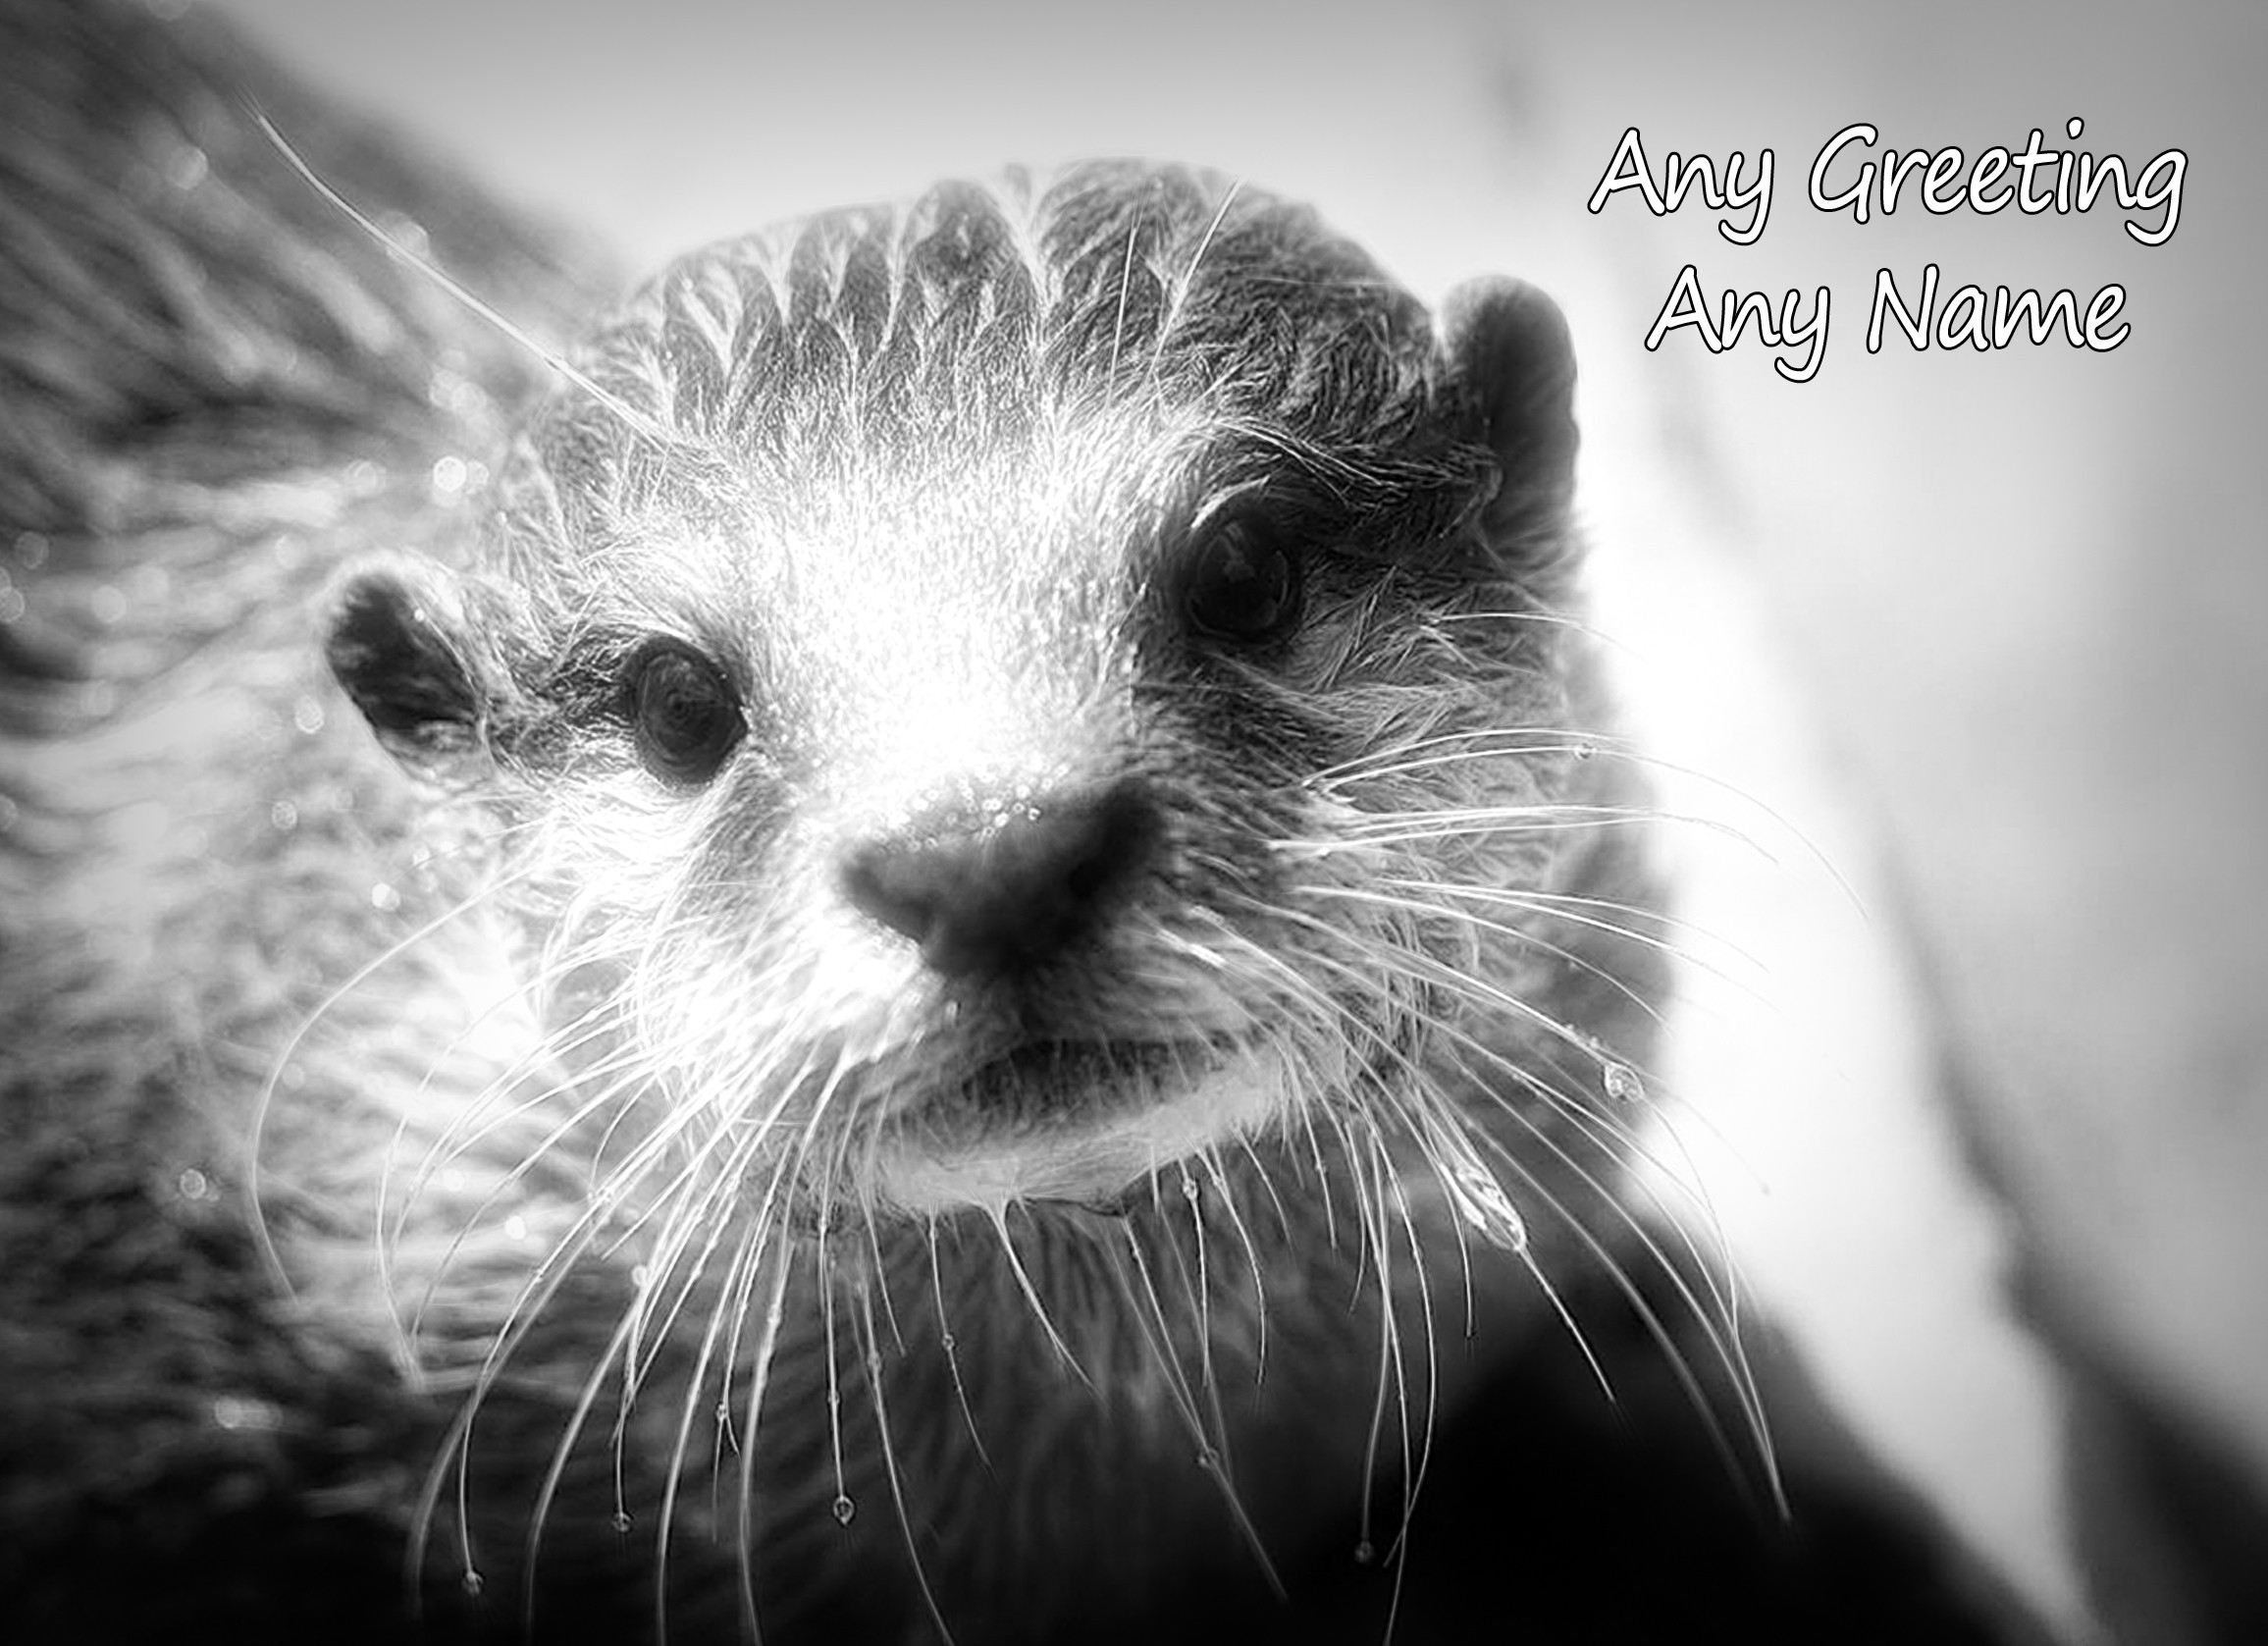 Personalised Otter Black and White Art Greeting Card (Birthday, Christmas, Any Occasion)